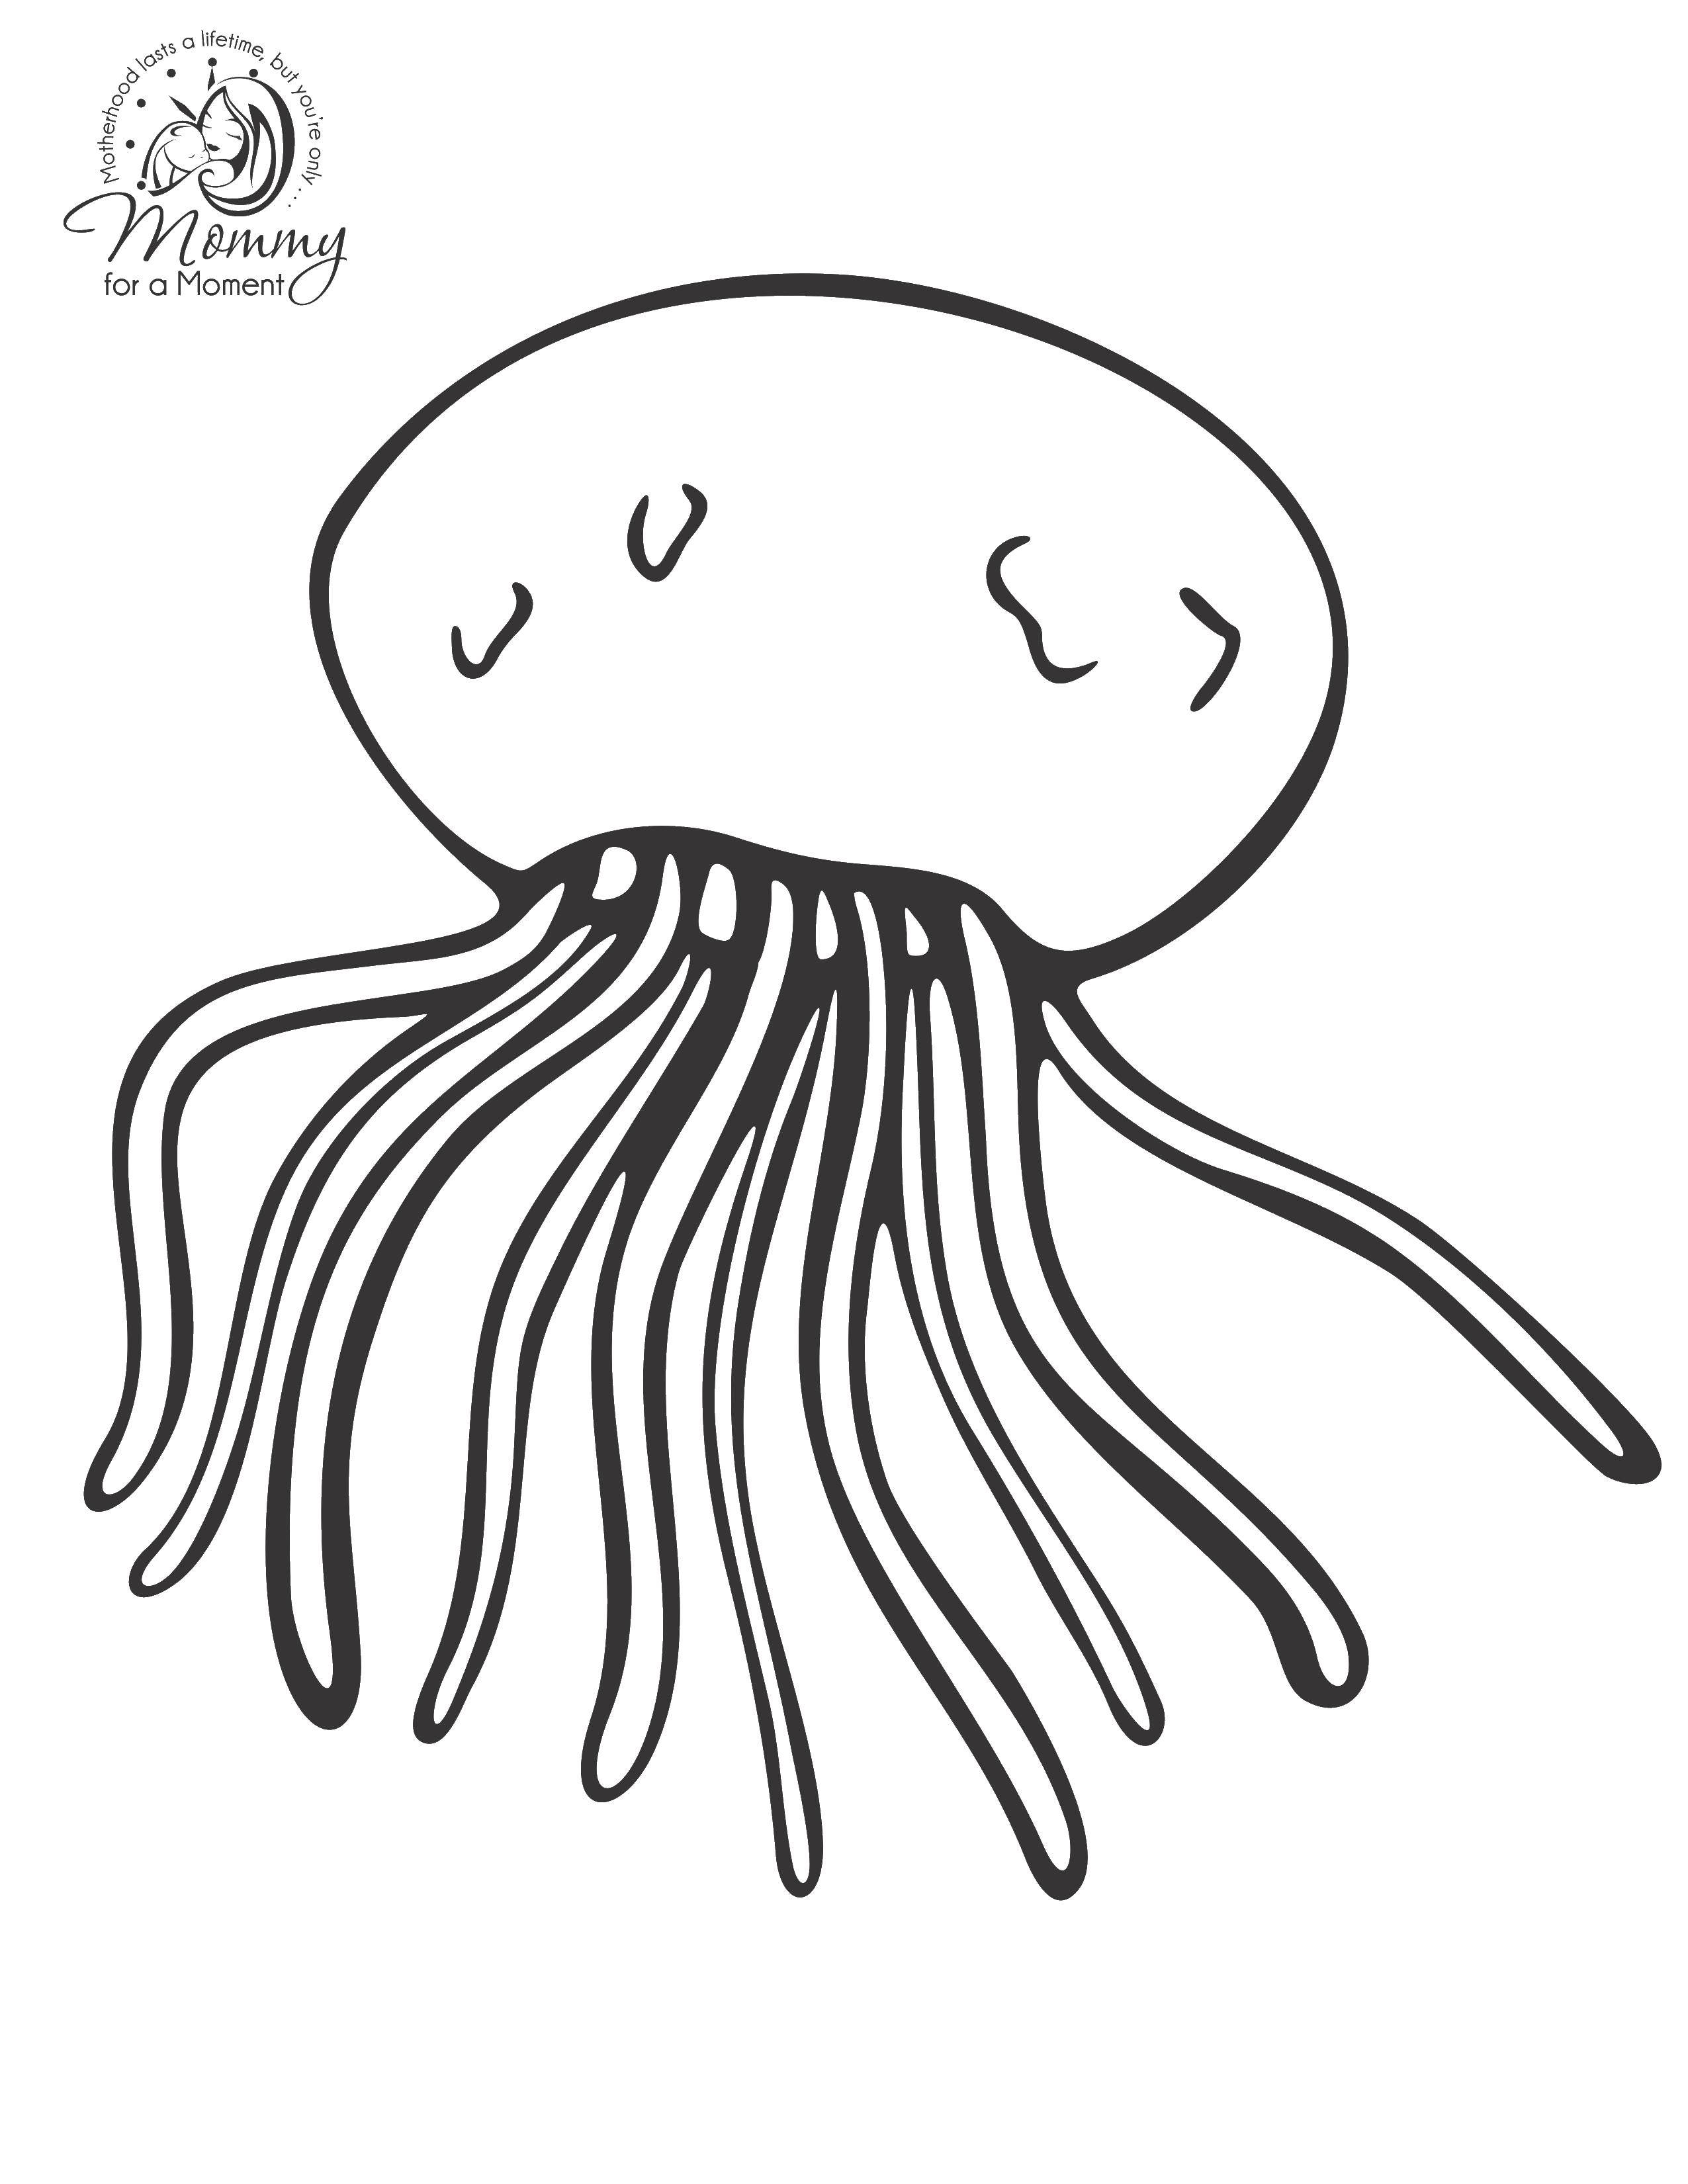 Coloring Circuit jellyfish. Category Sea animals. Tags:  Medusa of the sea.